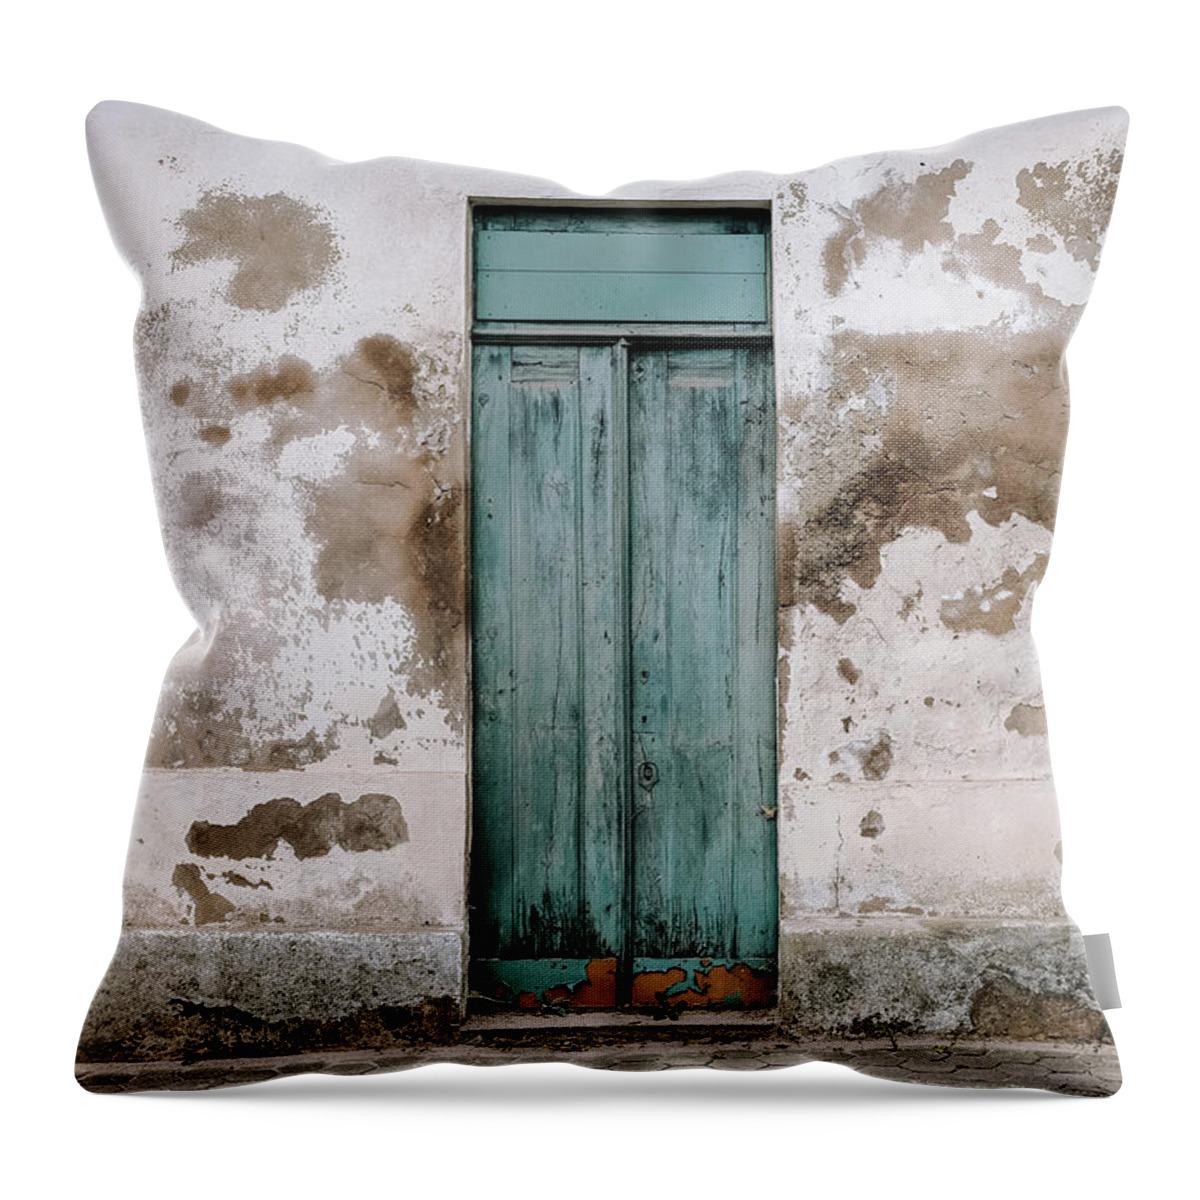 Weathered Door Throw Pillow featuring the photograph Door With No Number #7 by Marco Oliveira